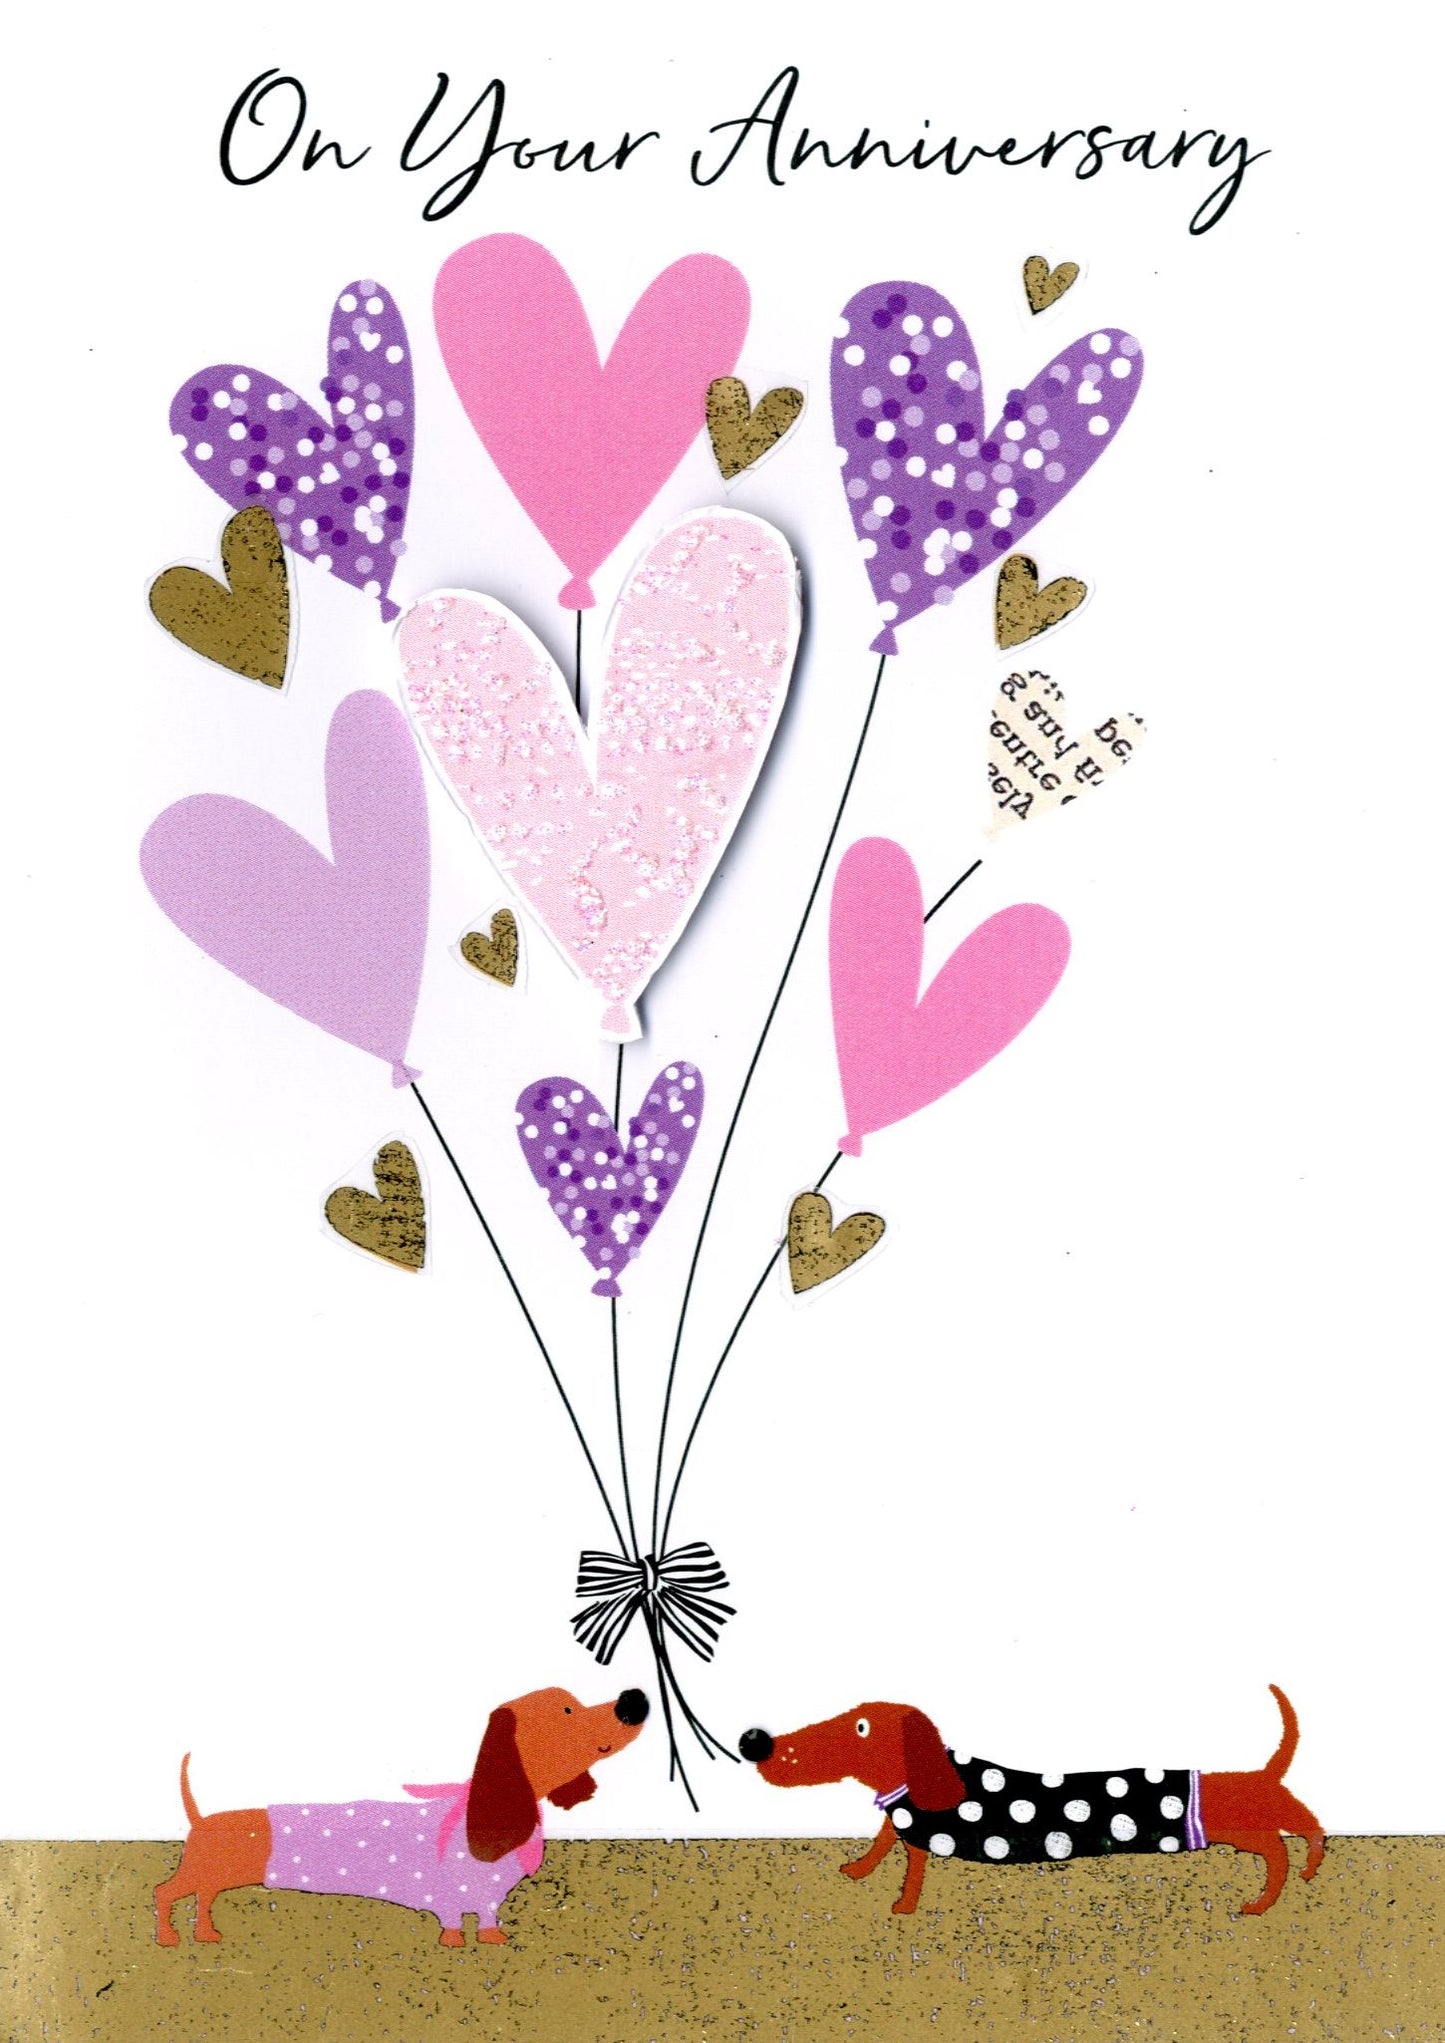 On Your Anniversary Heart Balloons Greeting Card